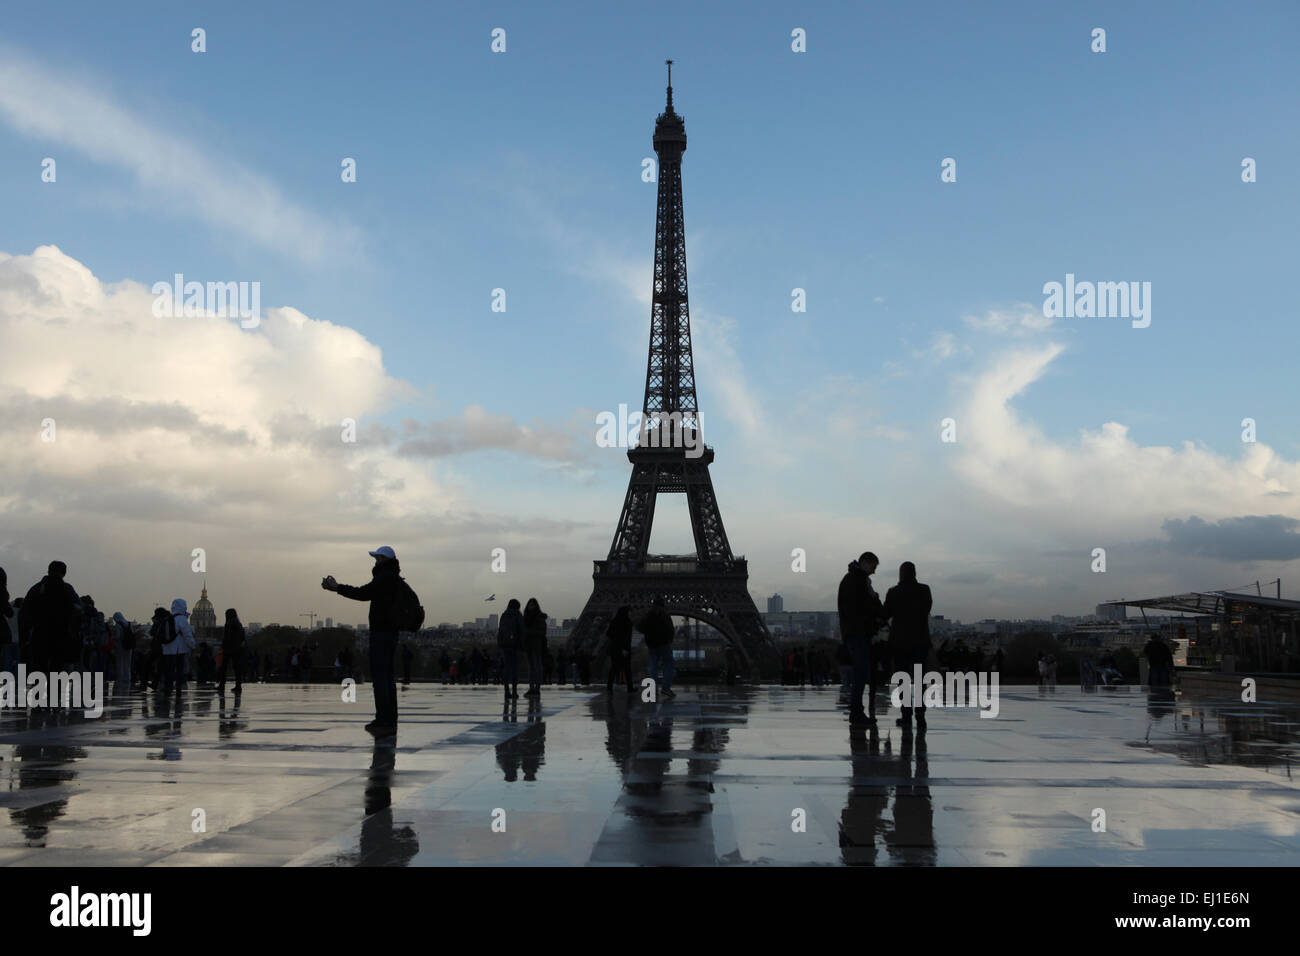 Eiffel Tower viewed from the Palais de Chaillot in Paris, France. Stock Photo